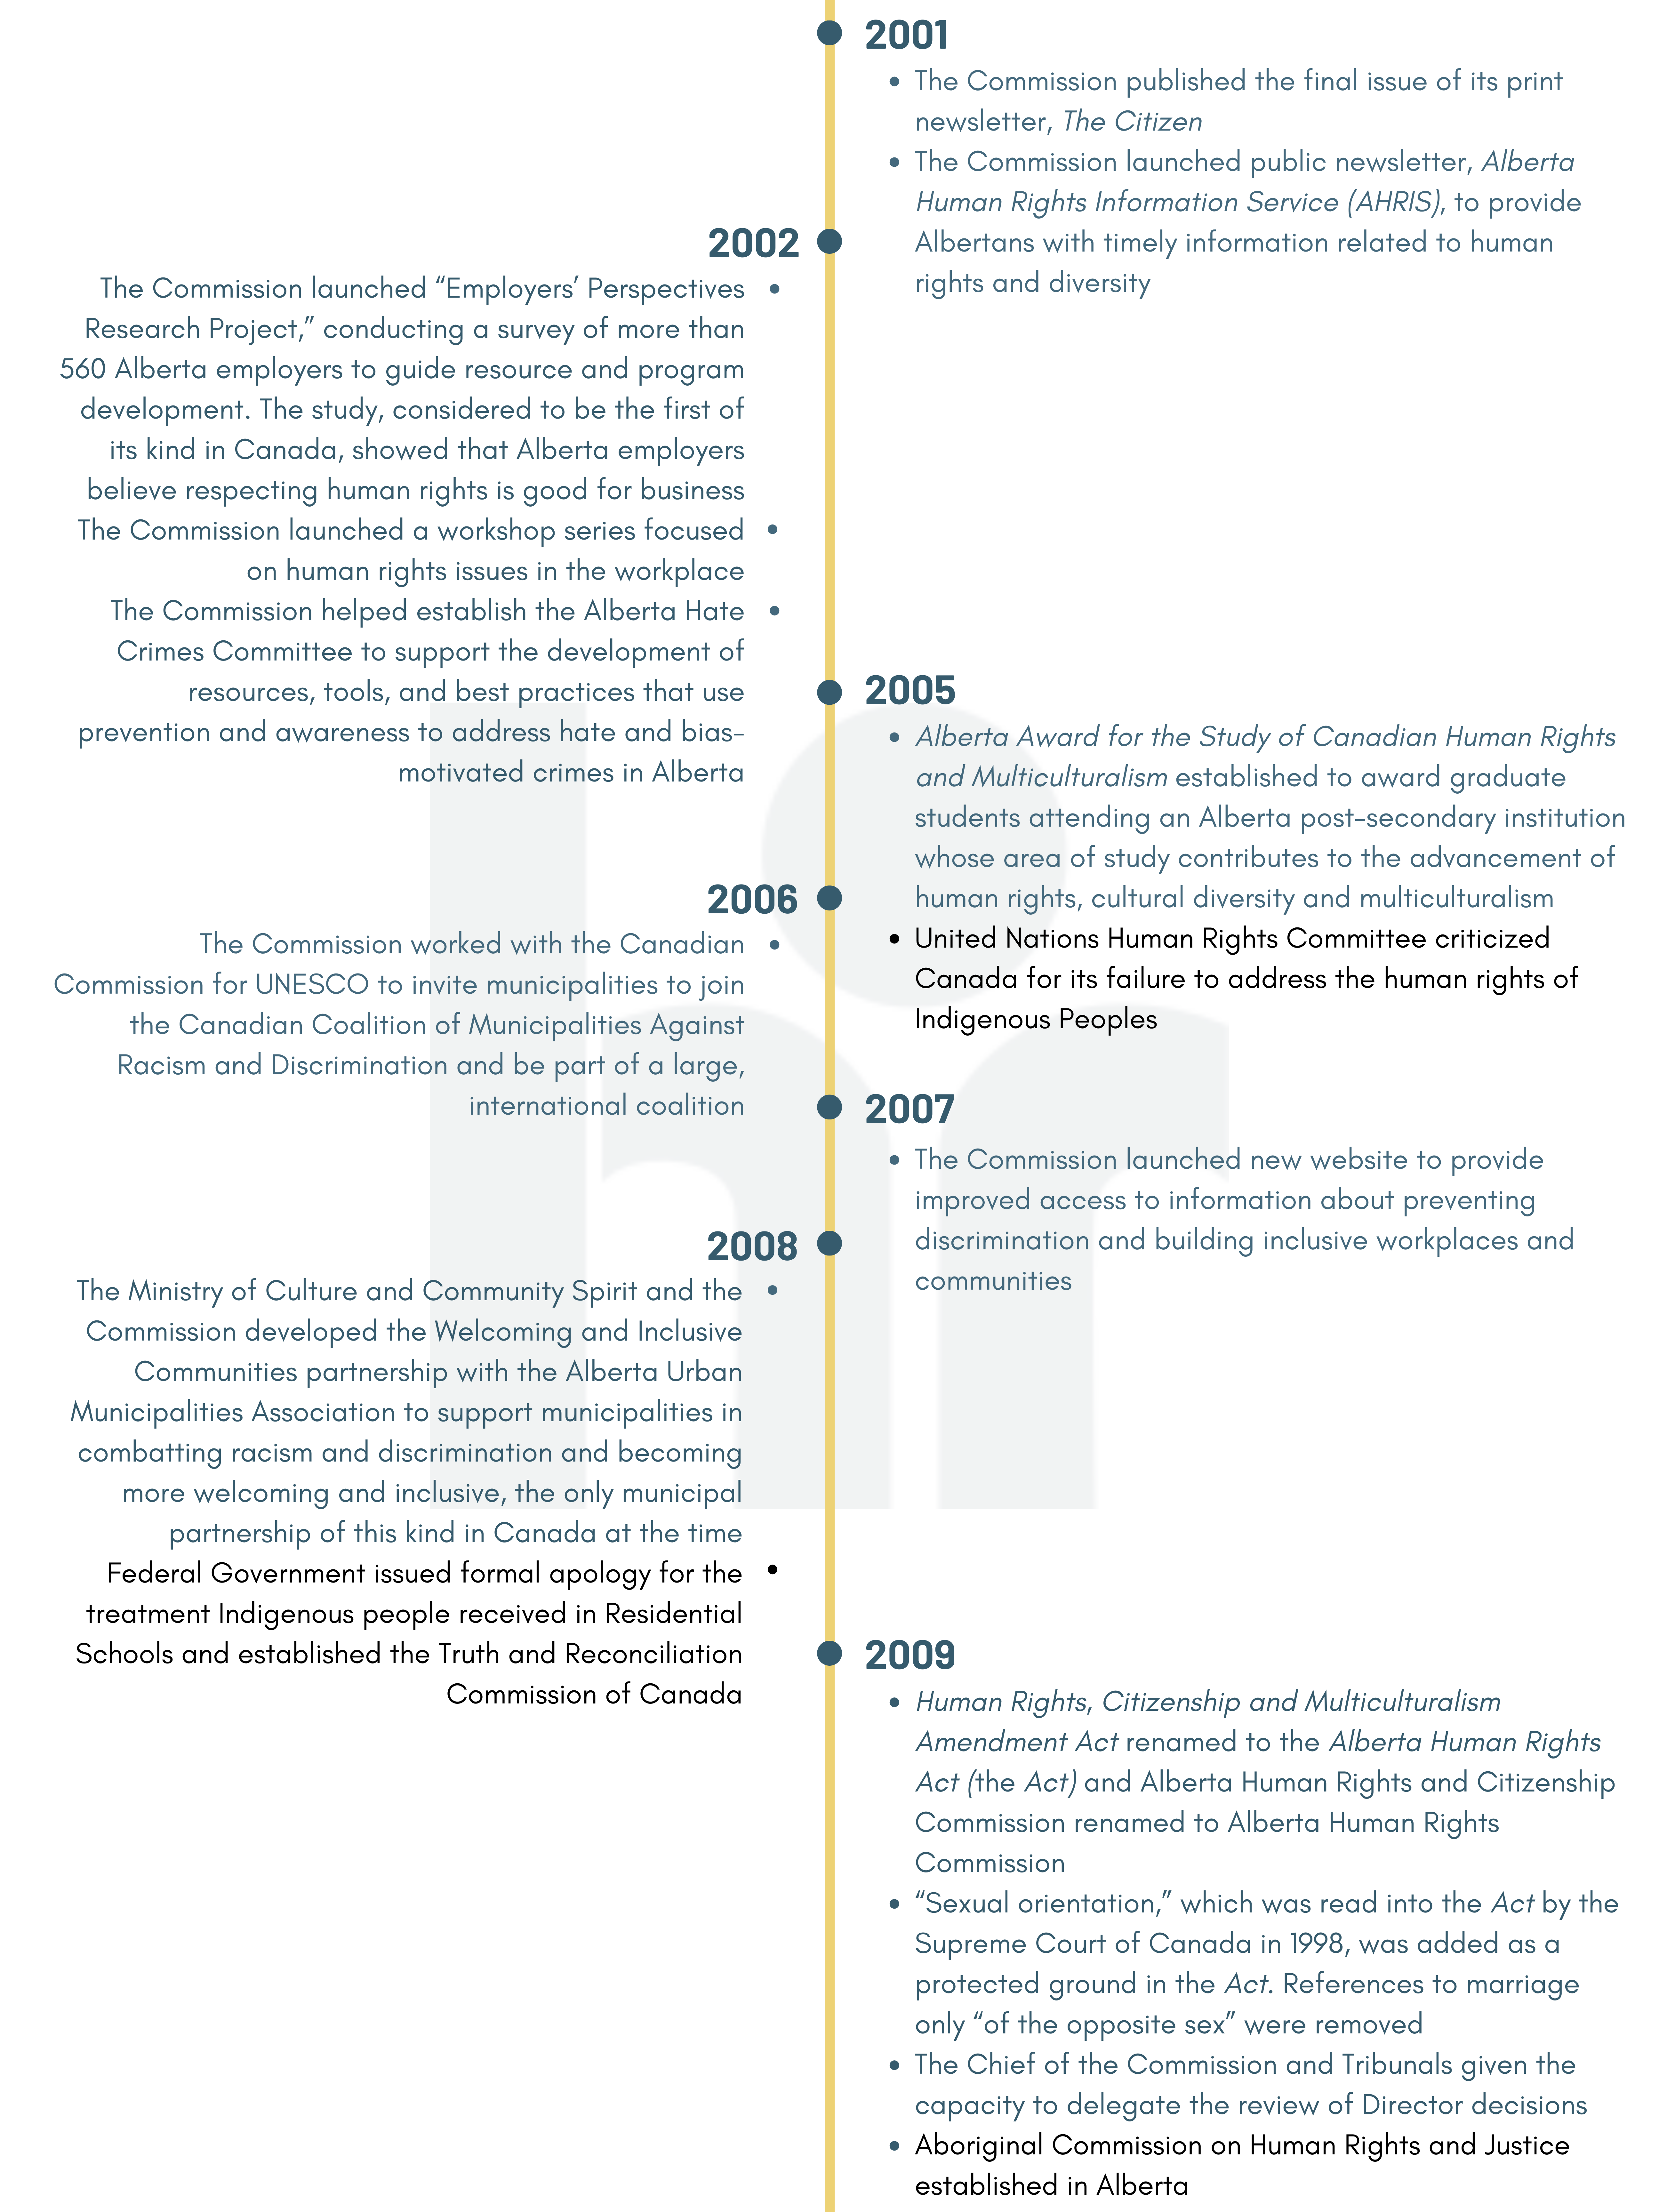 Timeline from 2001 to 2009 describing significant events in Alberta's human rights history. See link at top of page for full text.